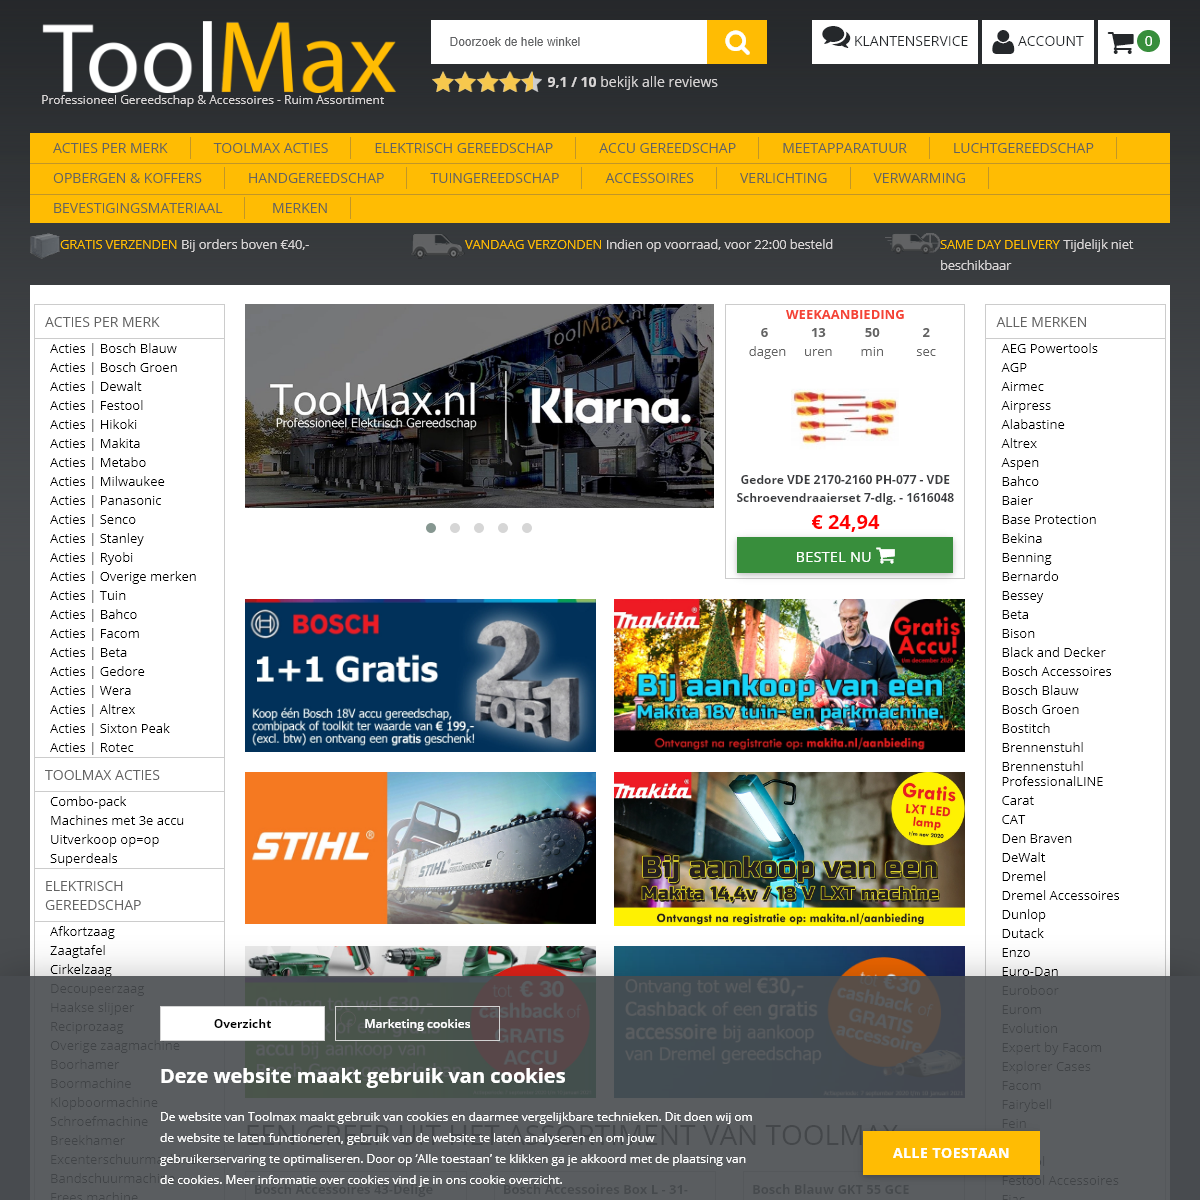 A complete backup of toolmax.nl